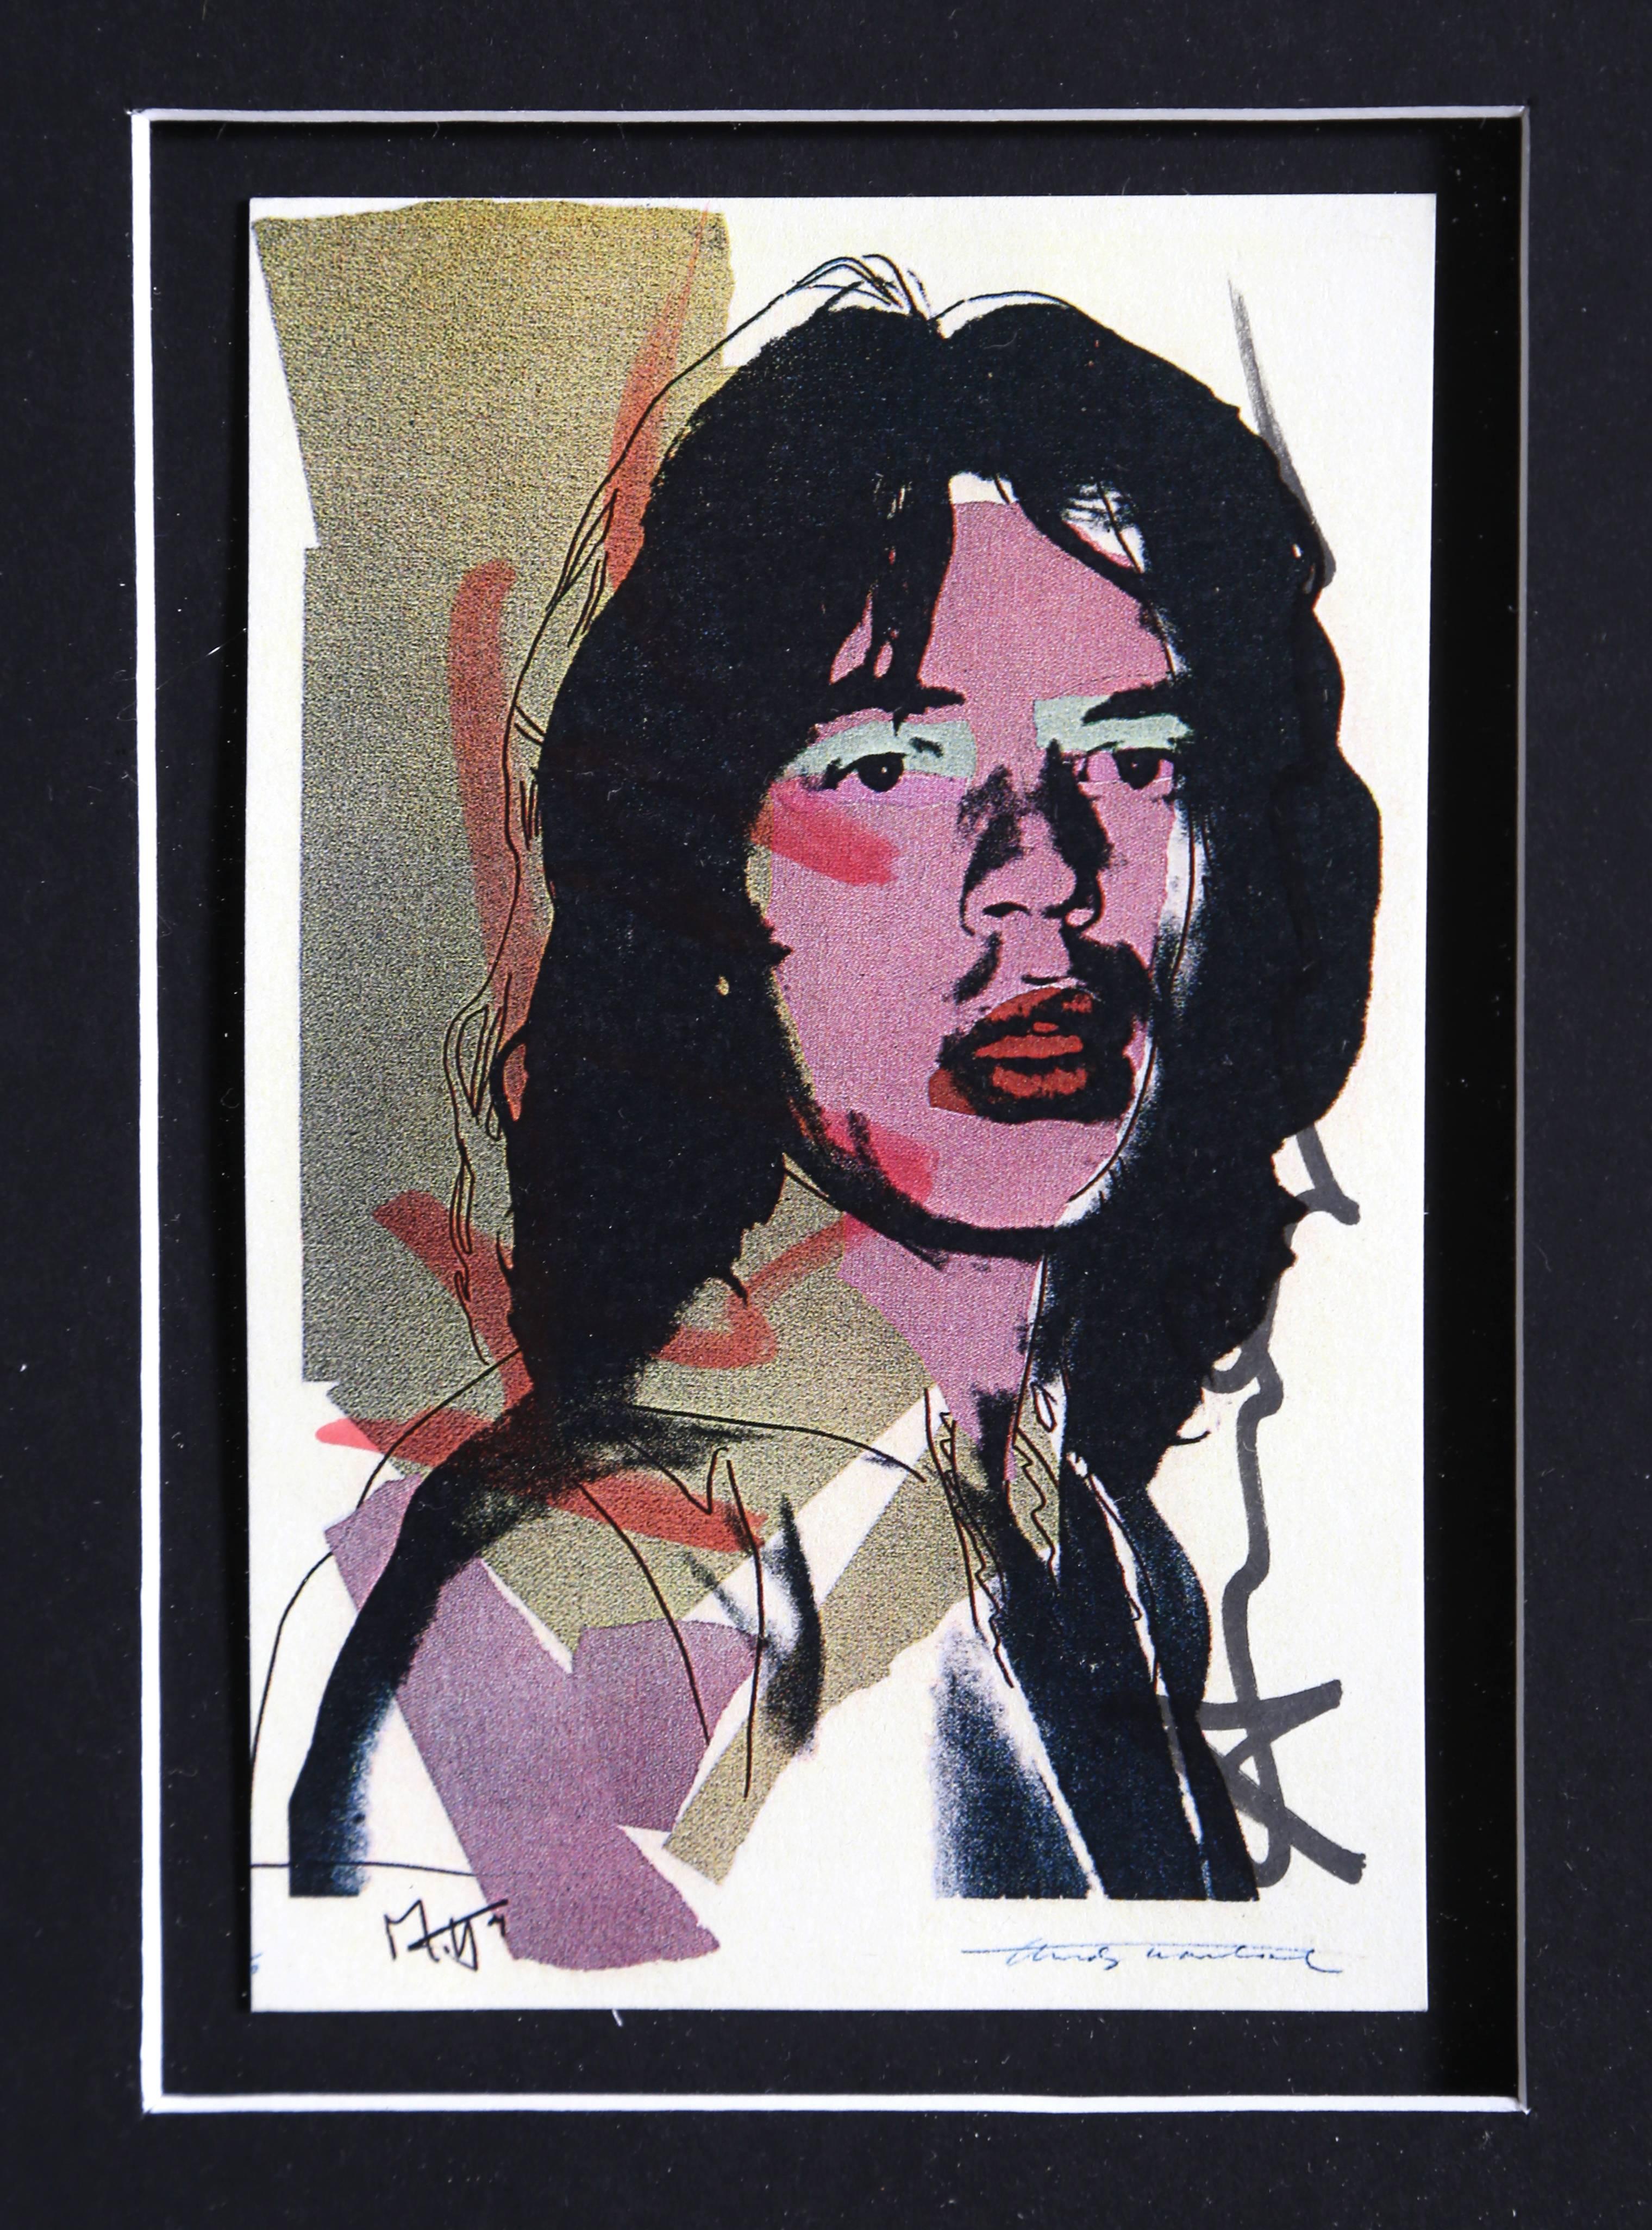 Mick Jagger Announcement Card Portfolio - Black Portrait Print by (after) Andy Warhol